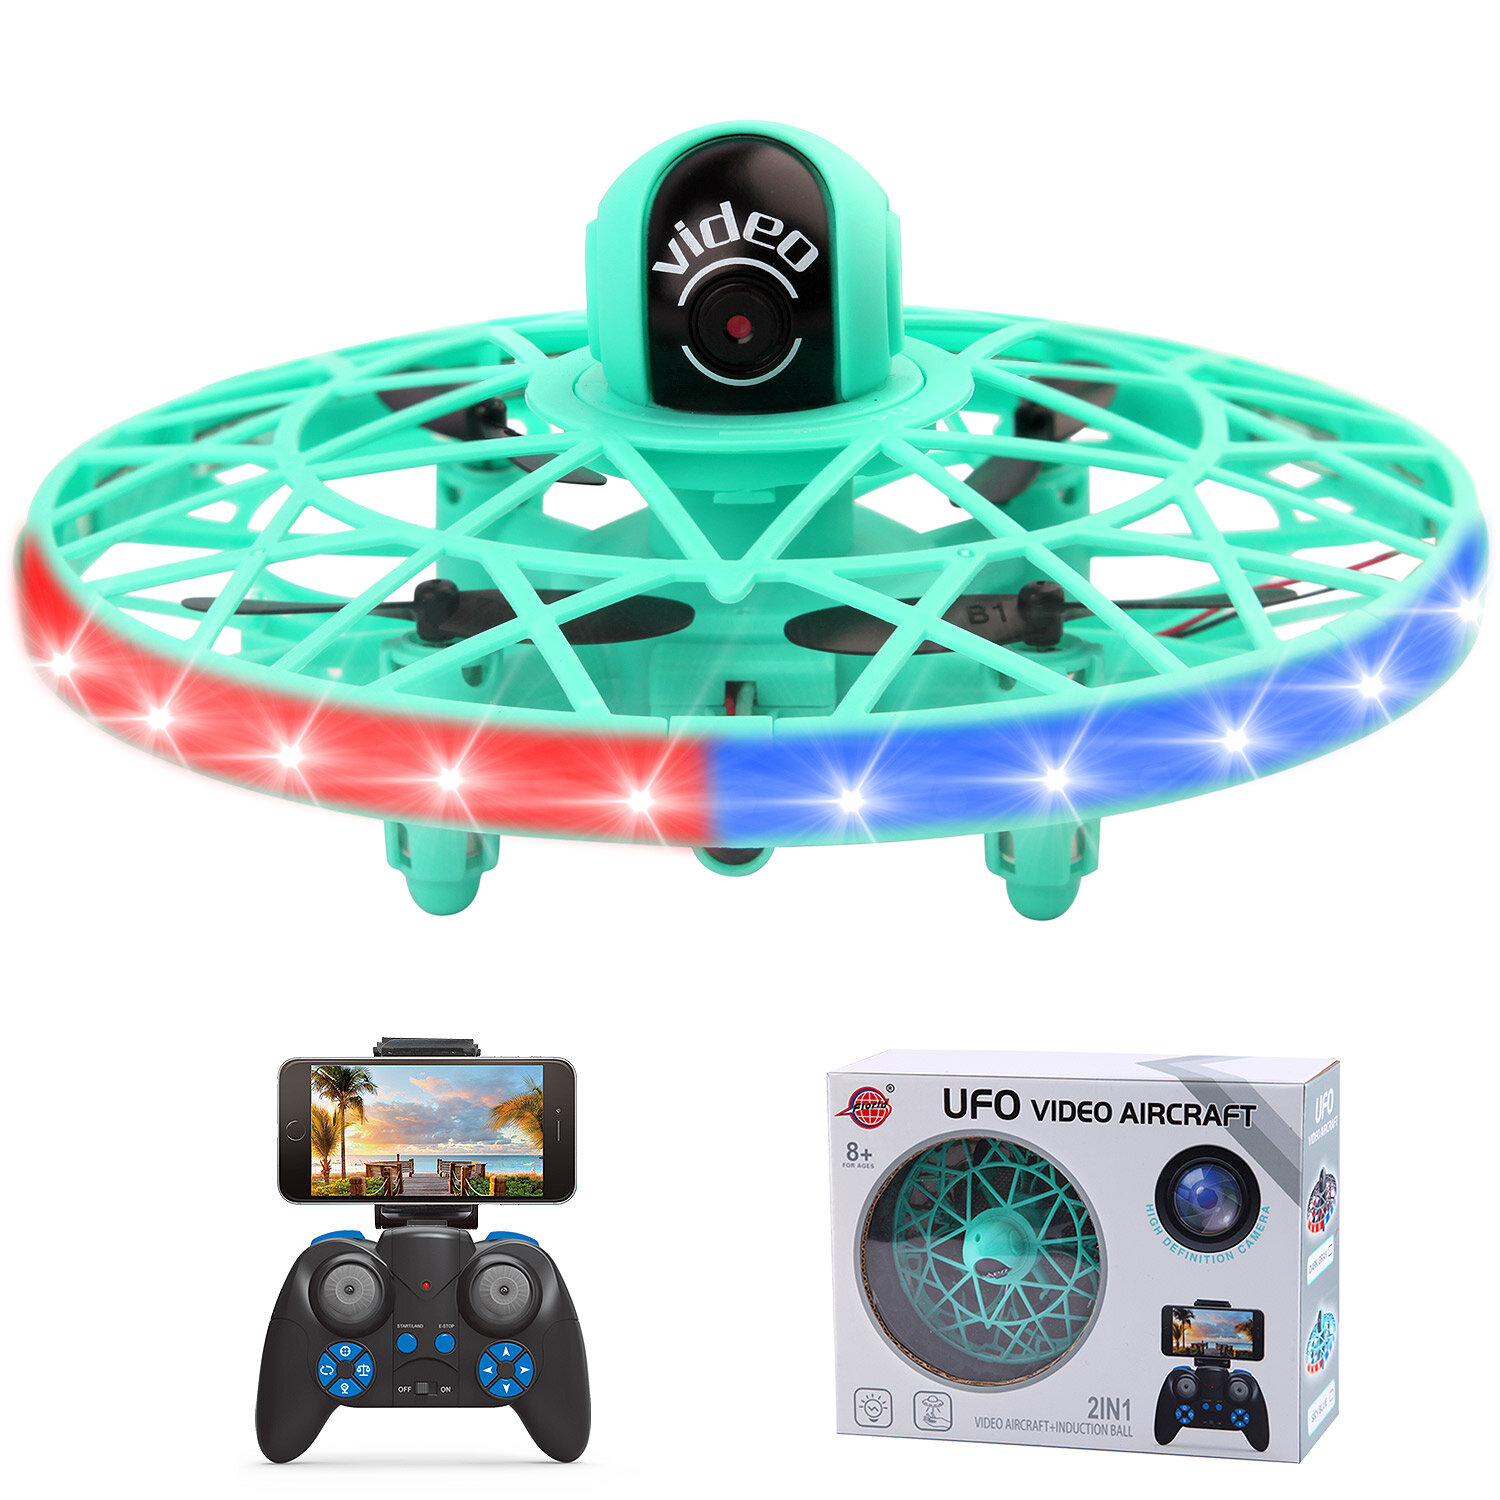 JJRC F26 F26W WiFi FPV with 720P HD Camera Gesture Inducing Sensing Flying Ball 2.4G RC Drone Quadco